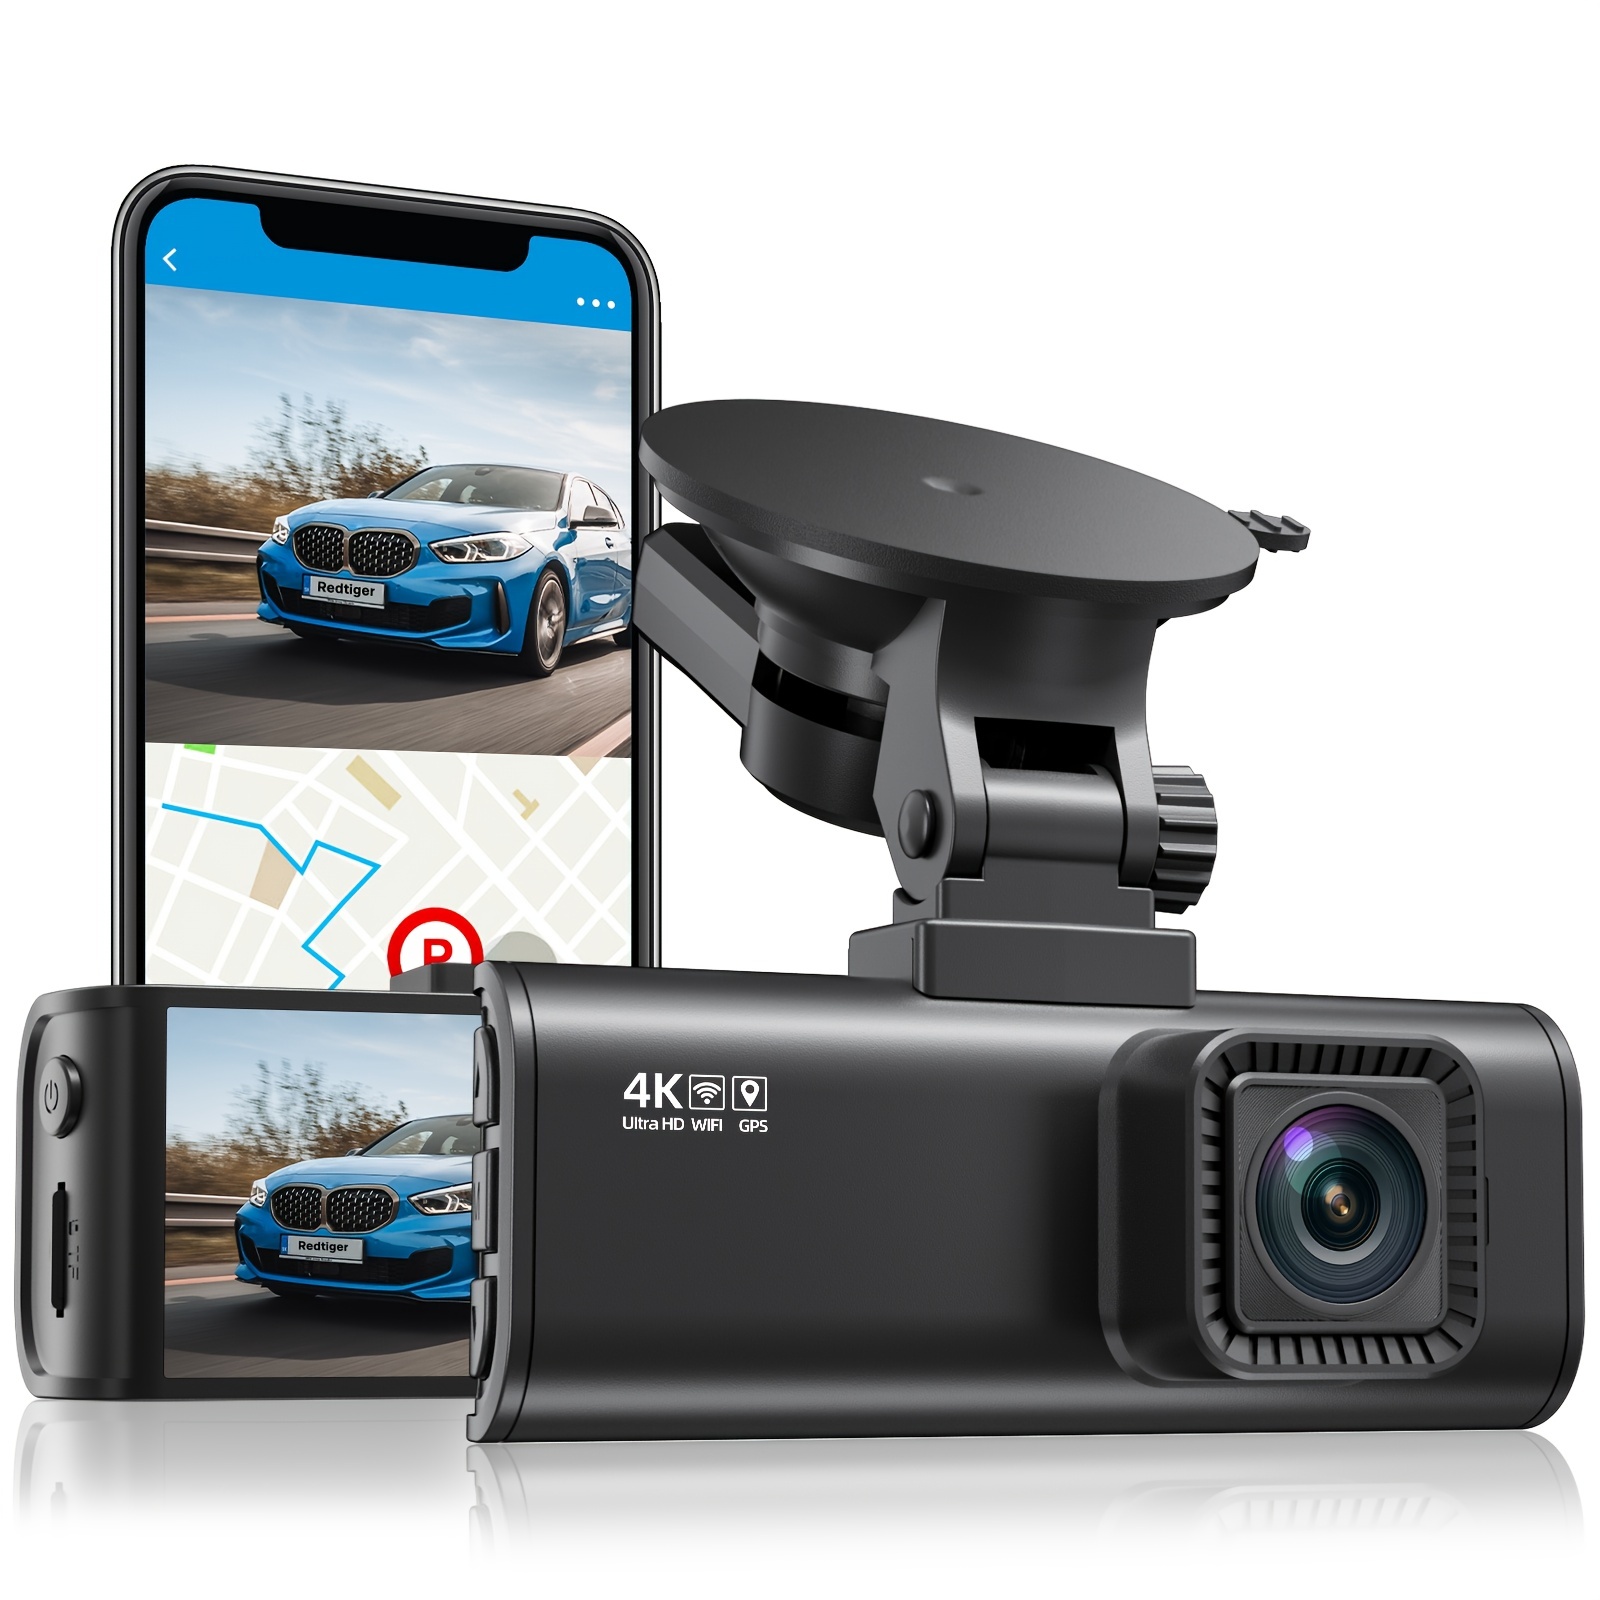 Heaboli Mini 4K Dash Cam with WiFi, GPS and Speed, Front Dash Camera for  Cars